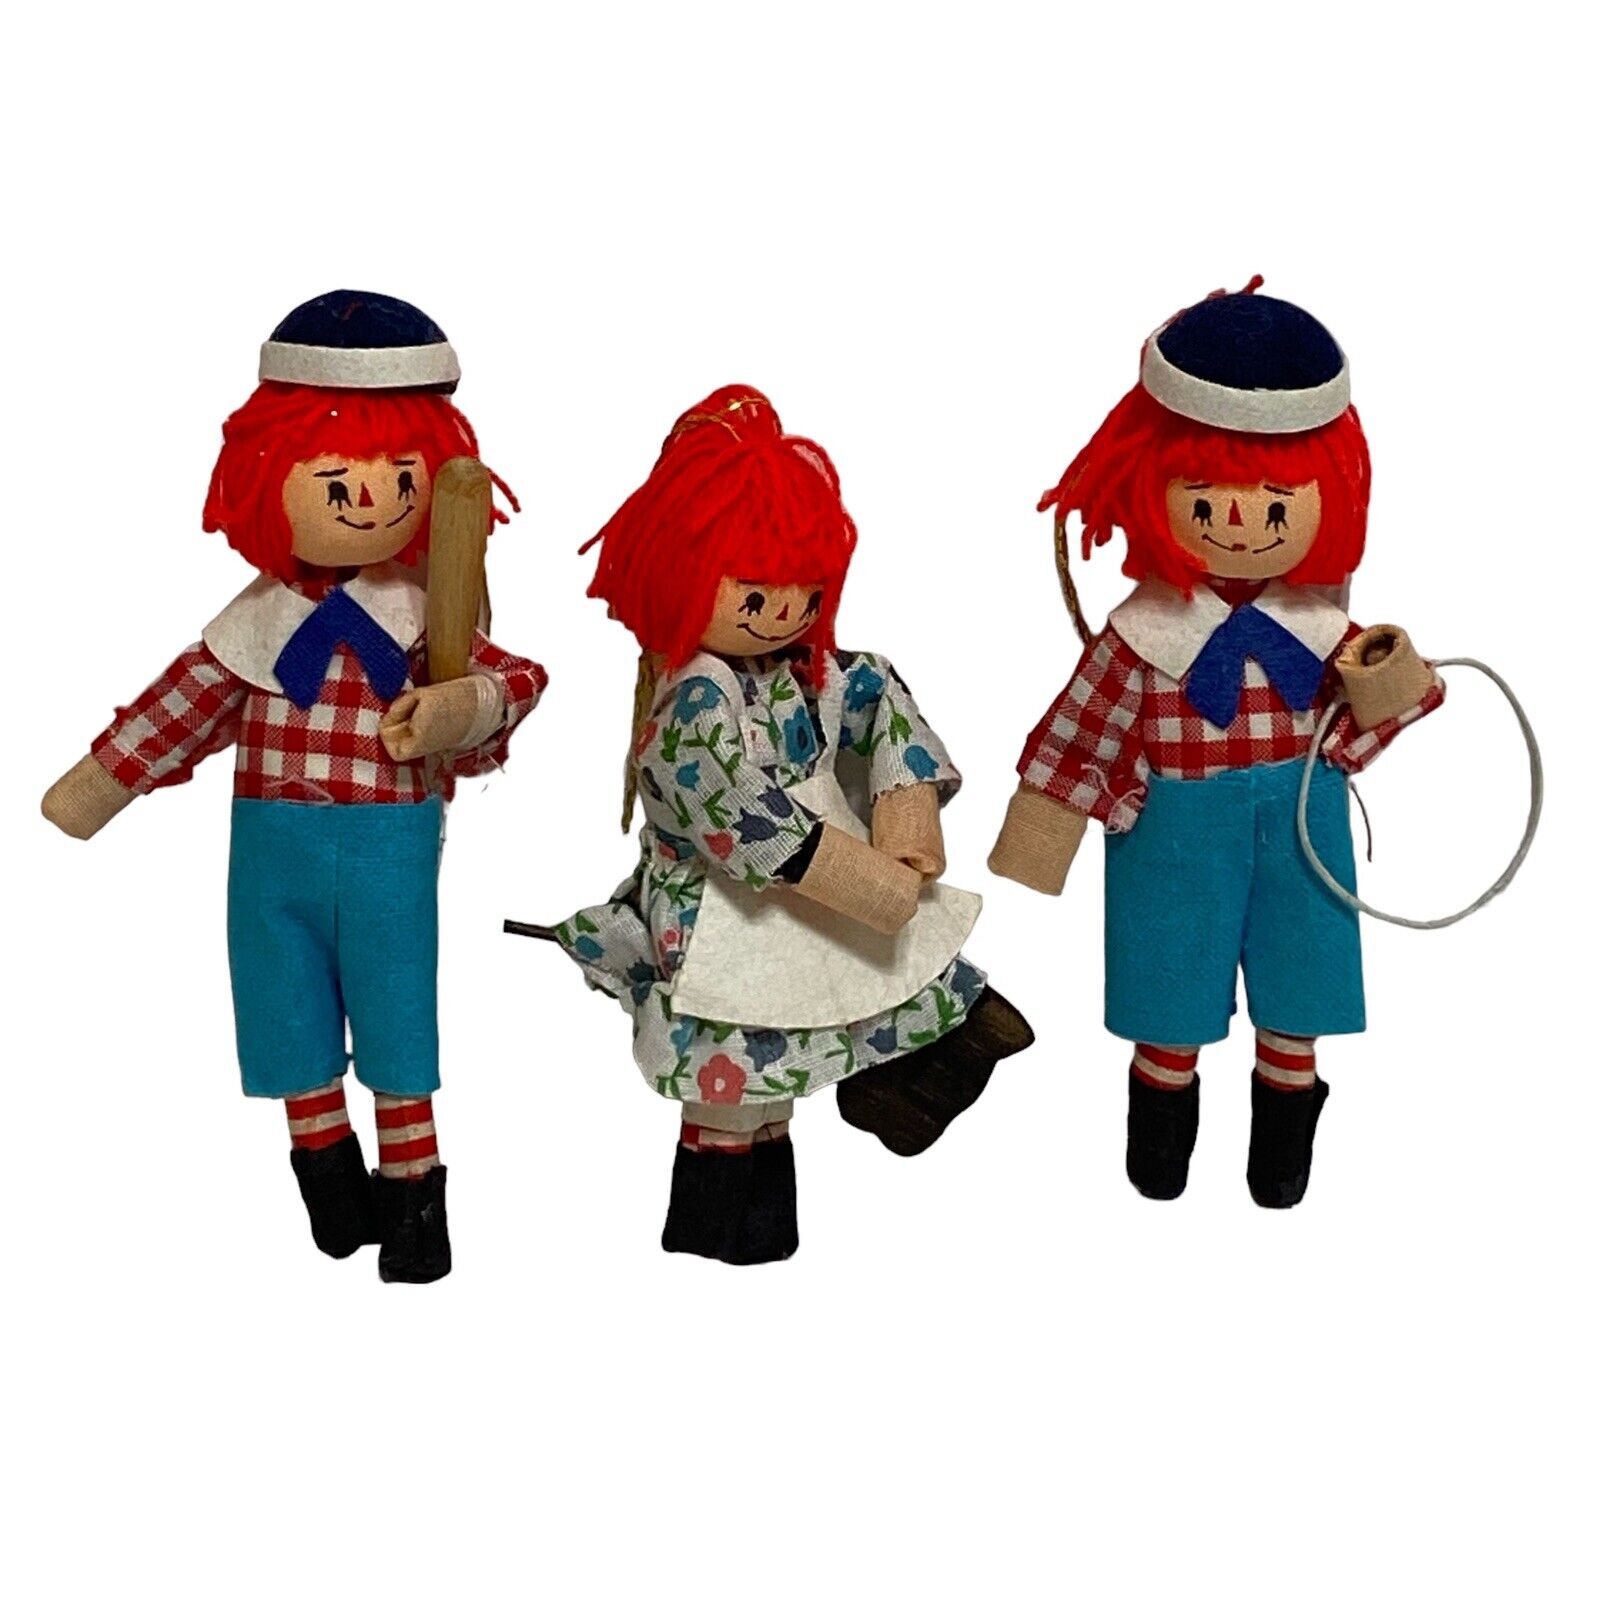 Vintage 1977 Raggedy Ann & Andy Playtime Ornaments Bobbs Merrill Lot Of 3